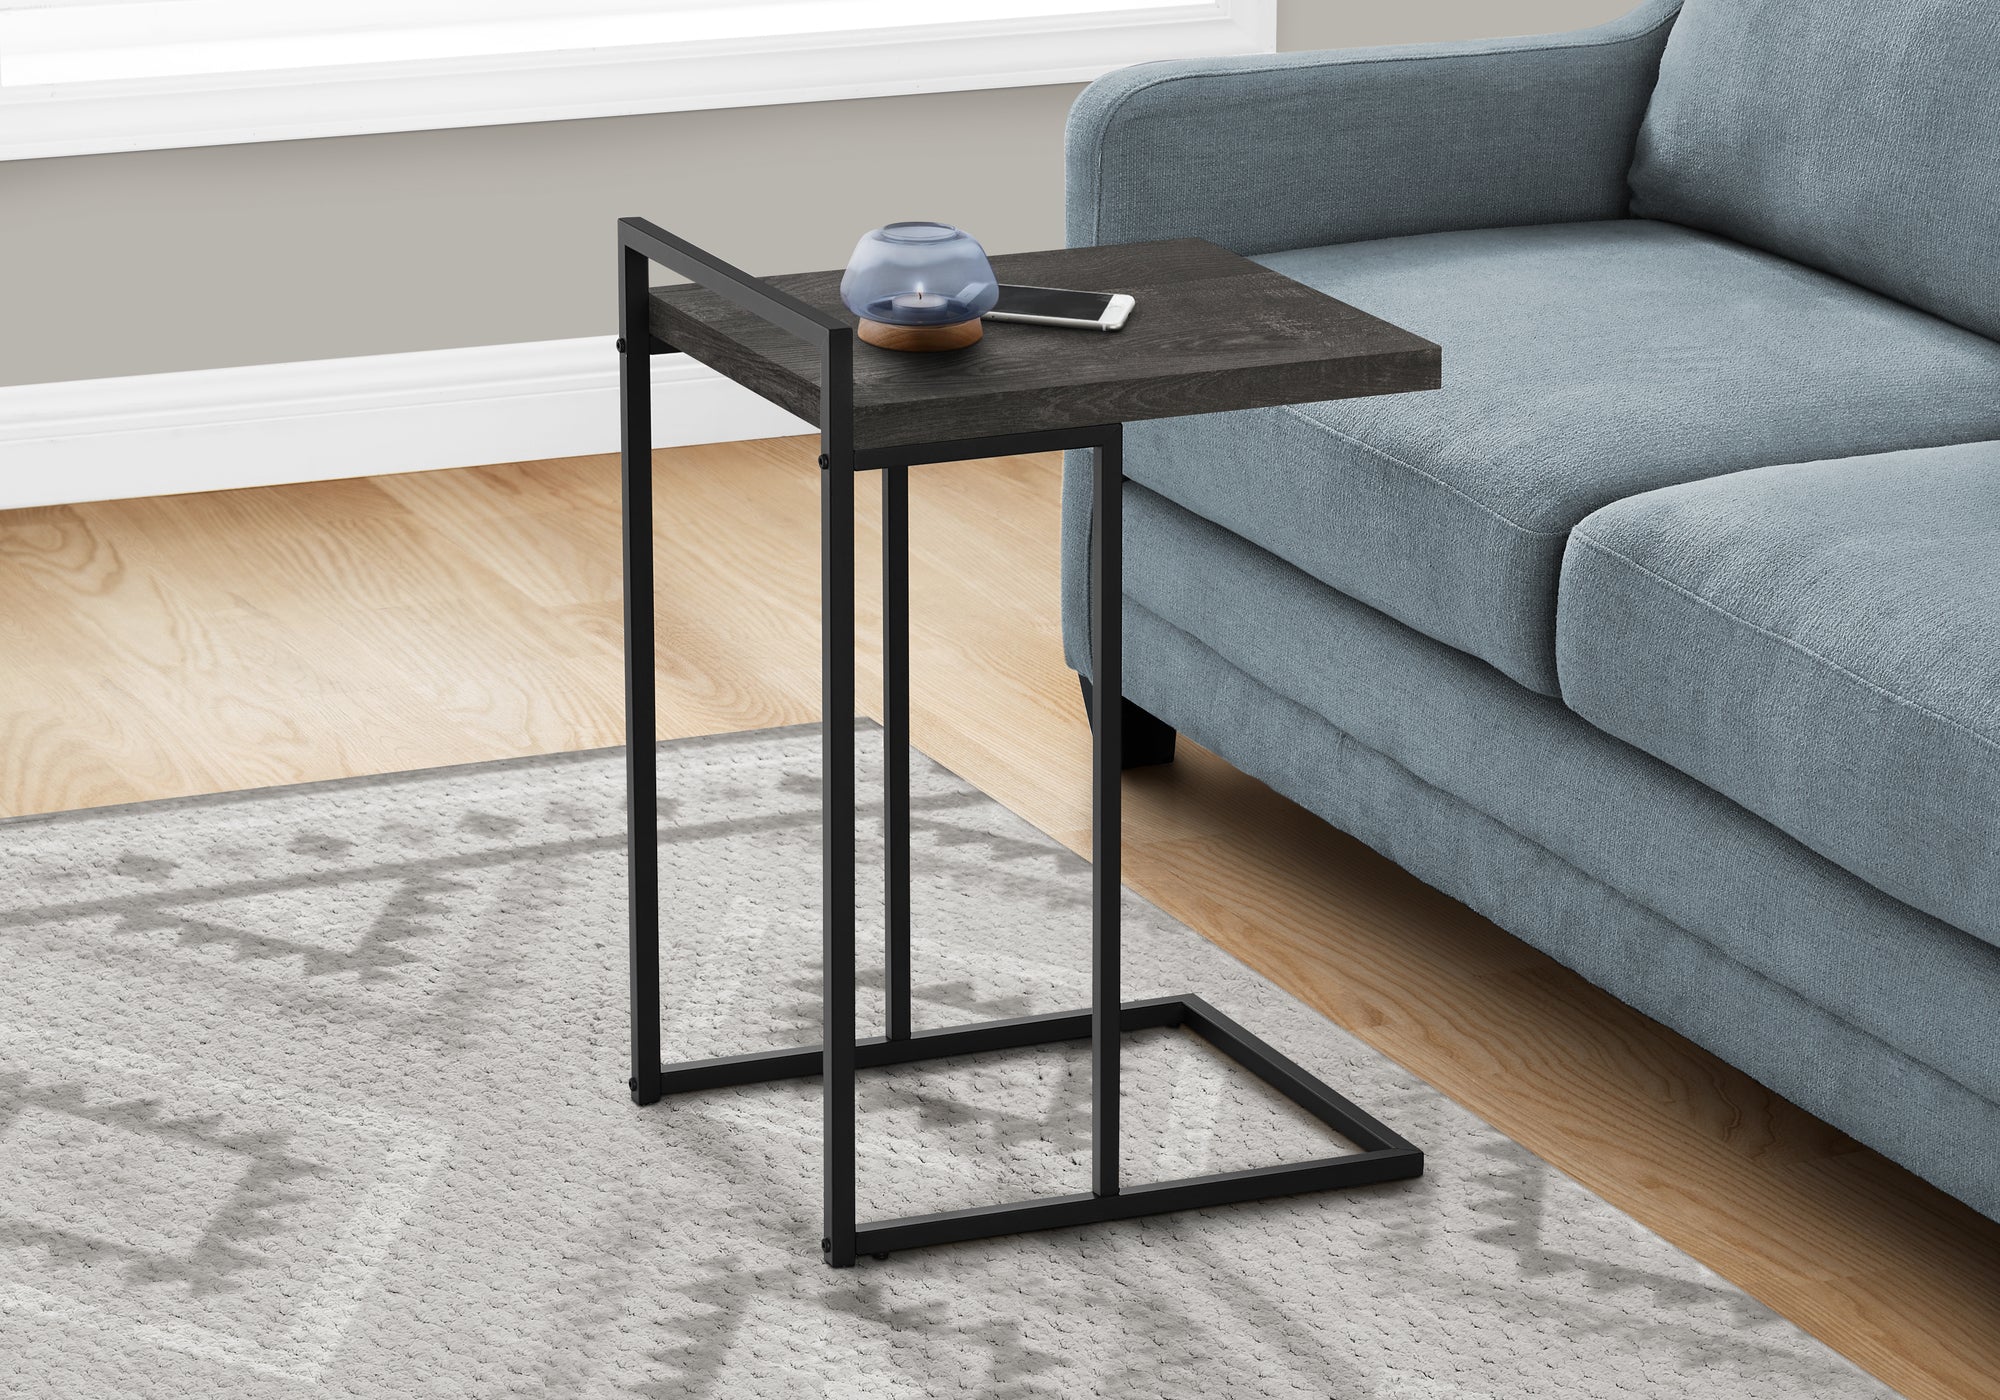 I 3633 - ACCENT TABLE - 25"H / BLACK RECLAIMED WOOD / BLACK METAL BY MONARCH SPECIALTIES INC